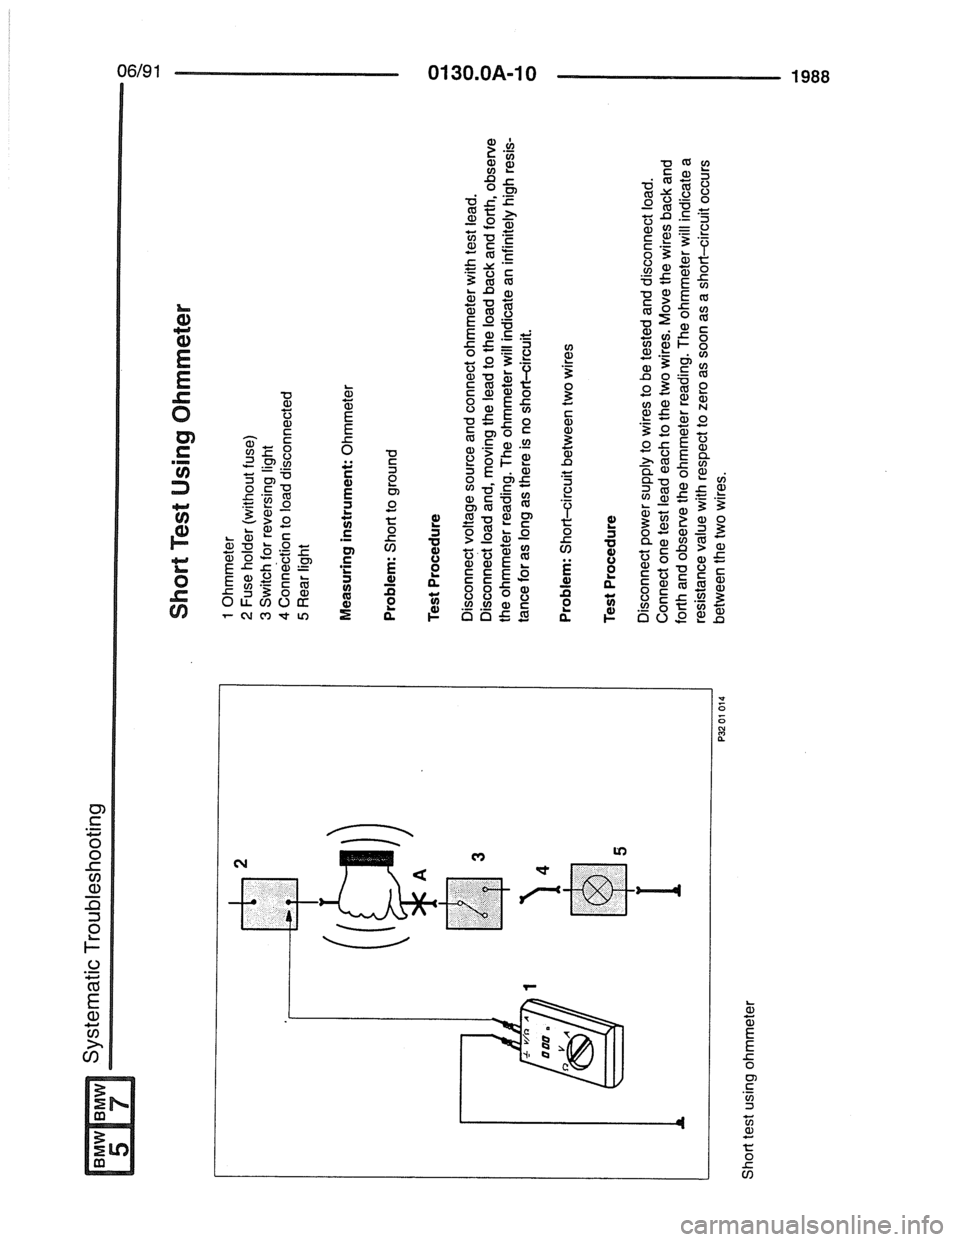 BMW 5 SERIES 1988 E34 Electrical Troubleshooting Manual 